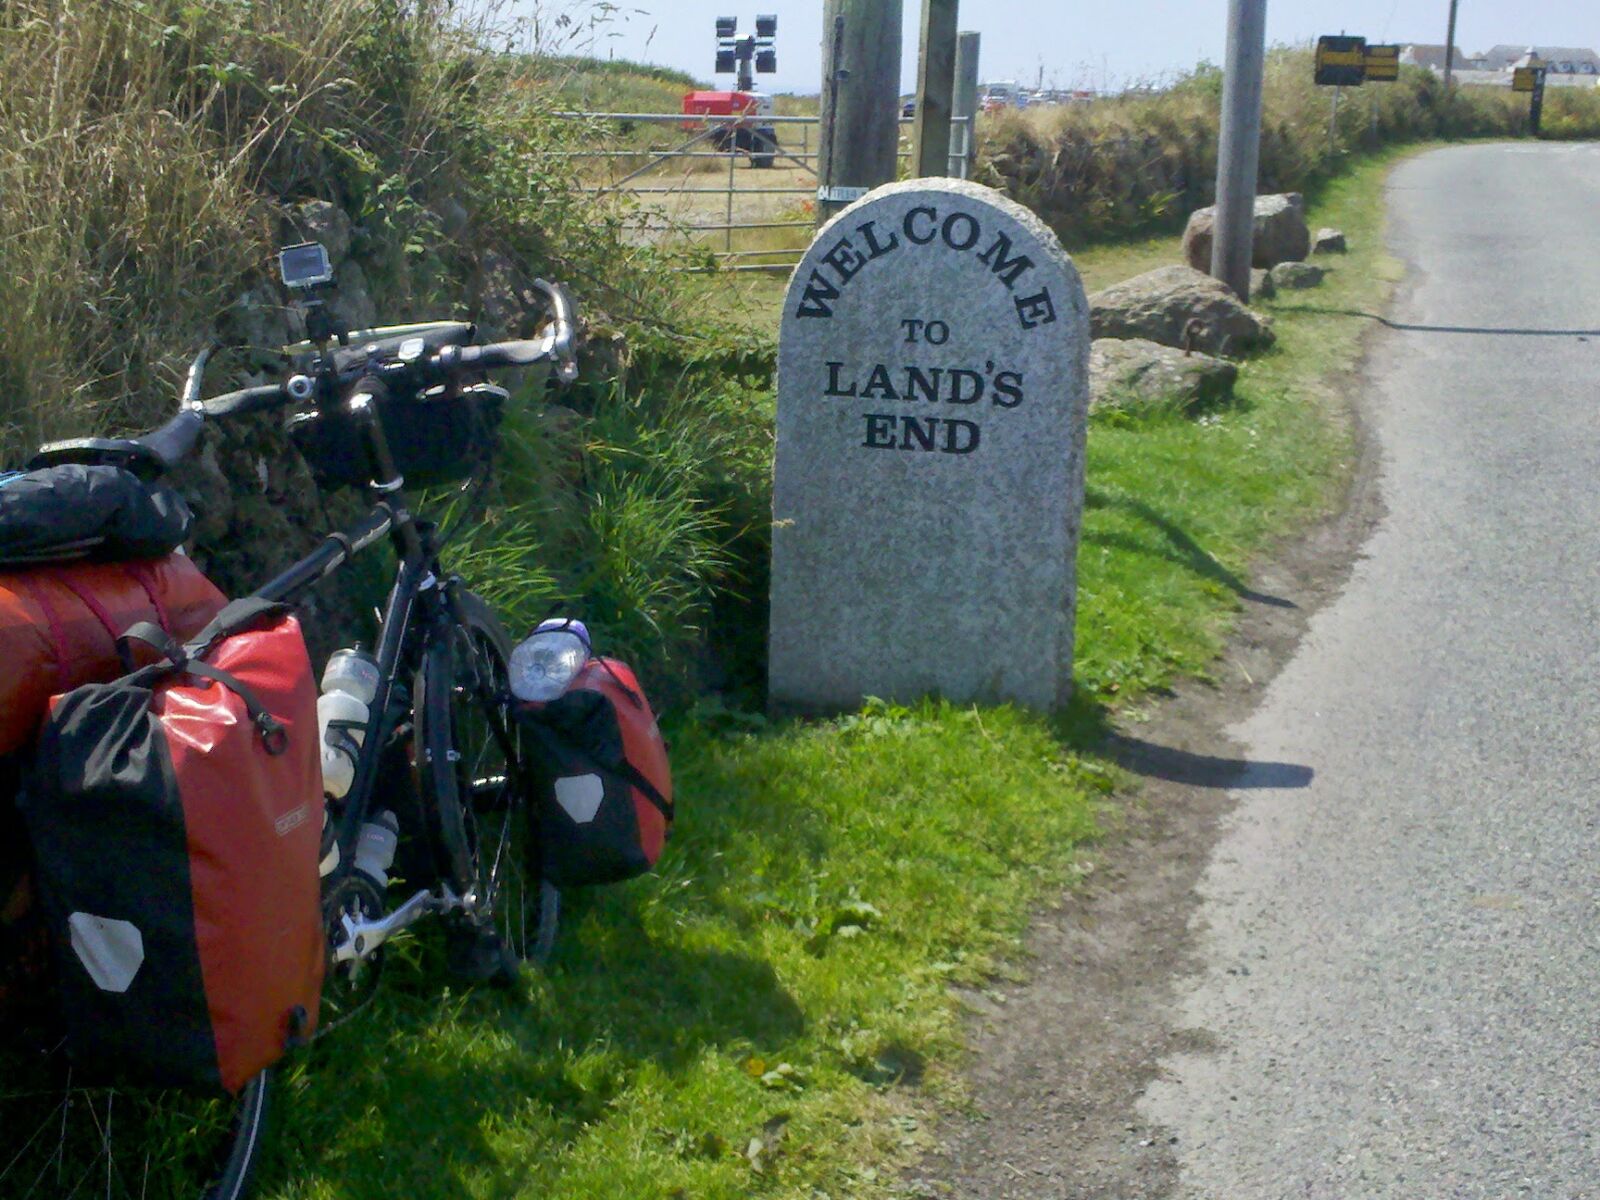 Touring bike by road sign